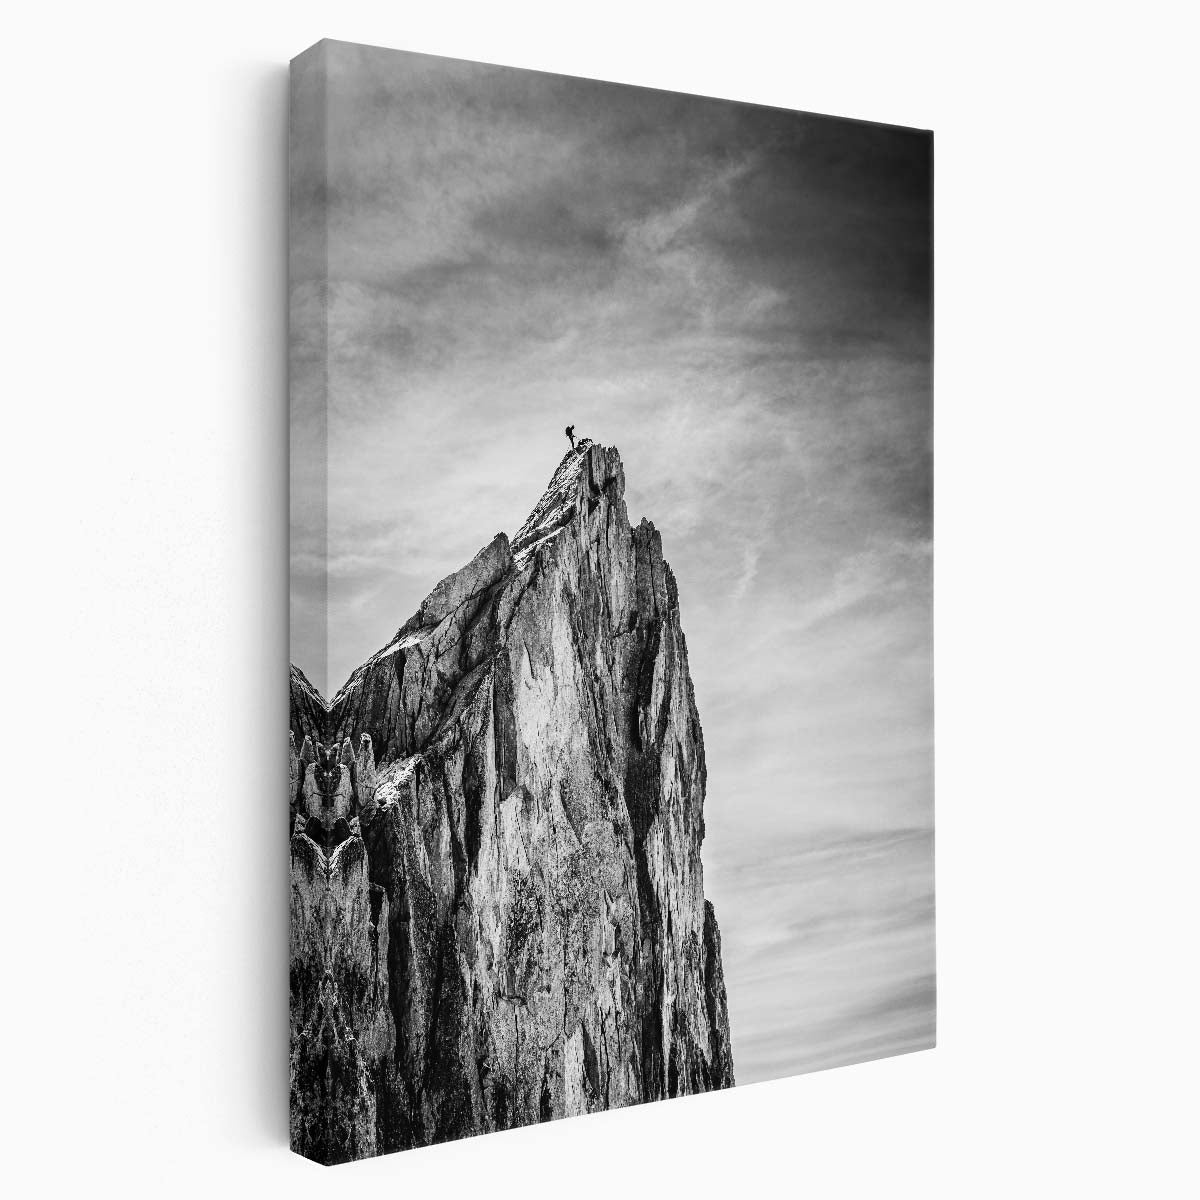 Adrenaline-Filled Mountain Climbing Adventure, Monochrome Hiker Photography Art by Luxuriance Designs, made in USA